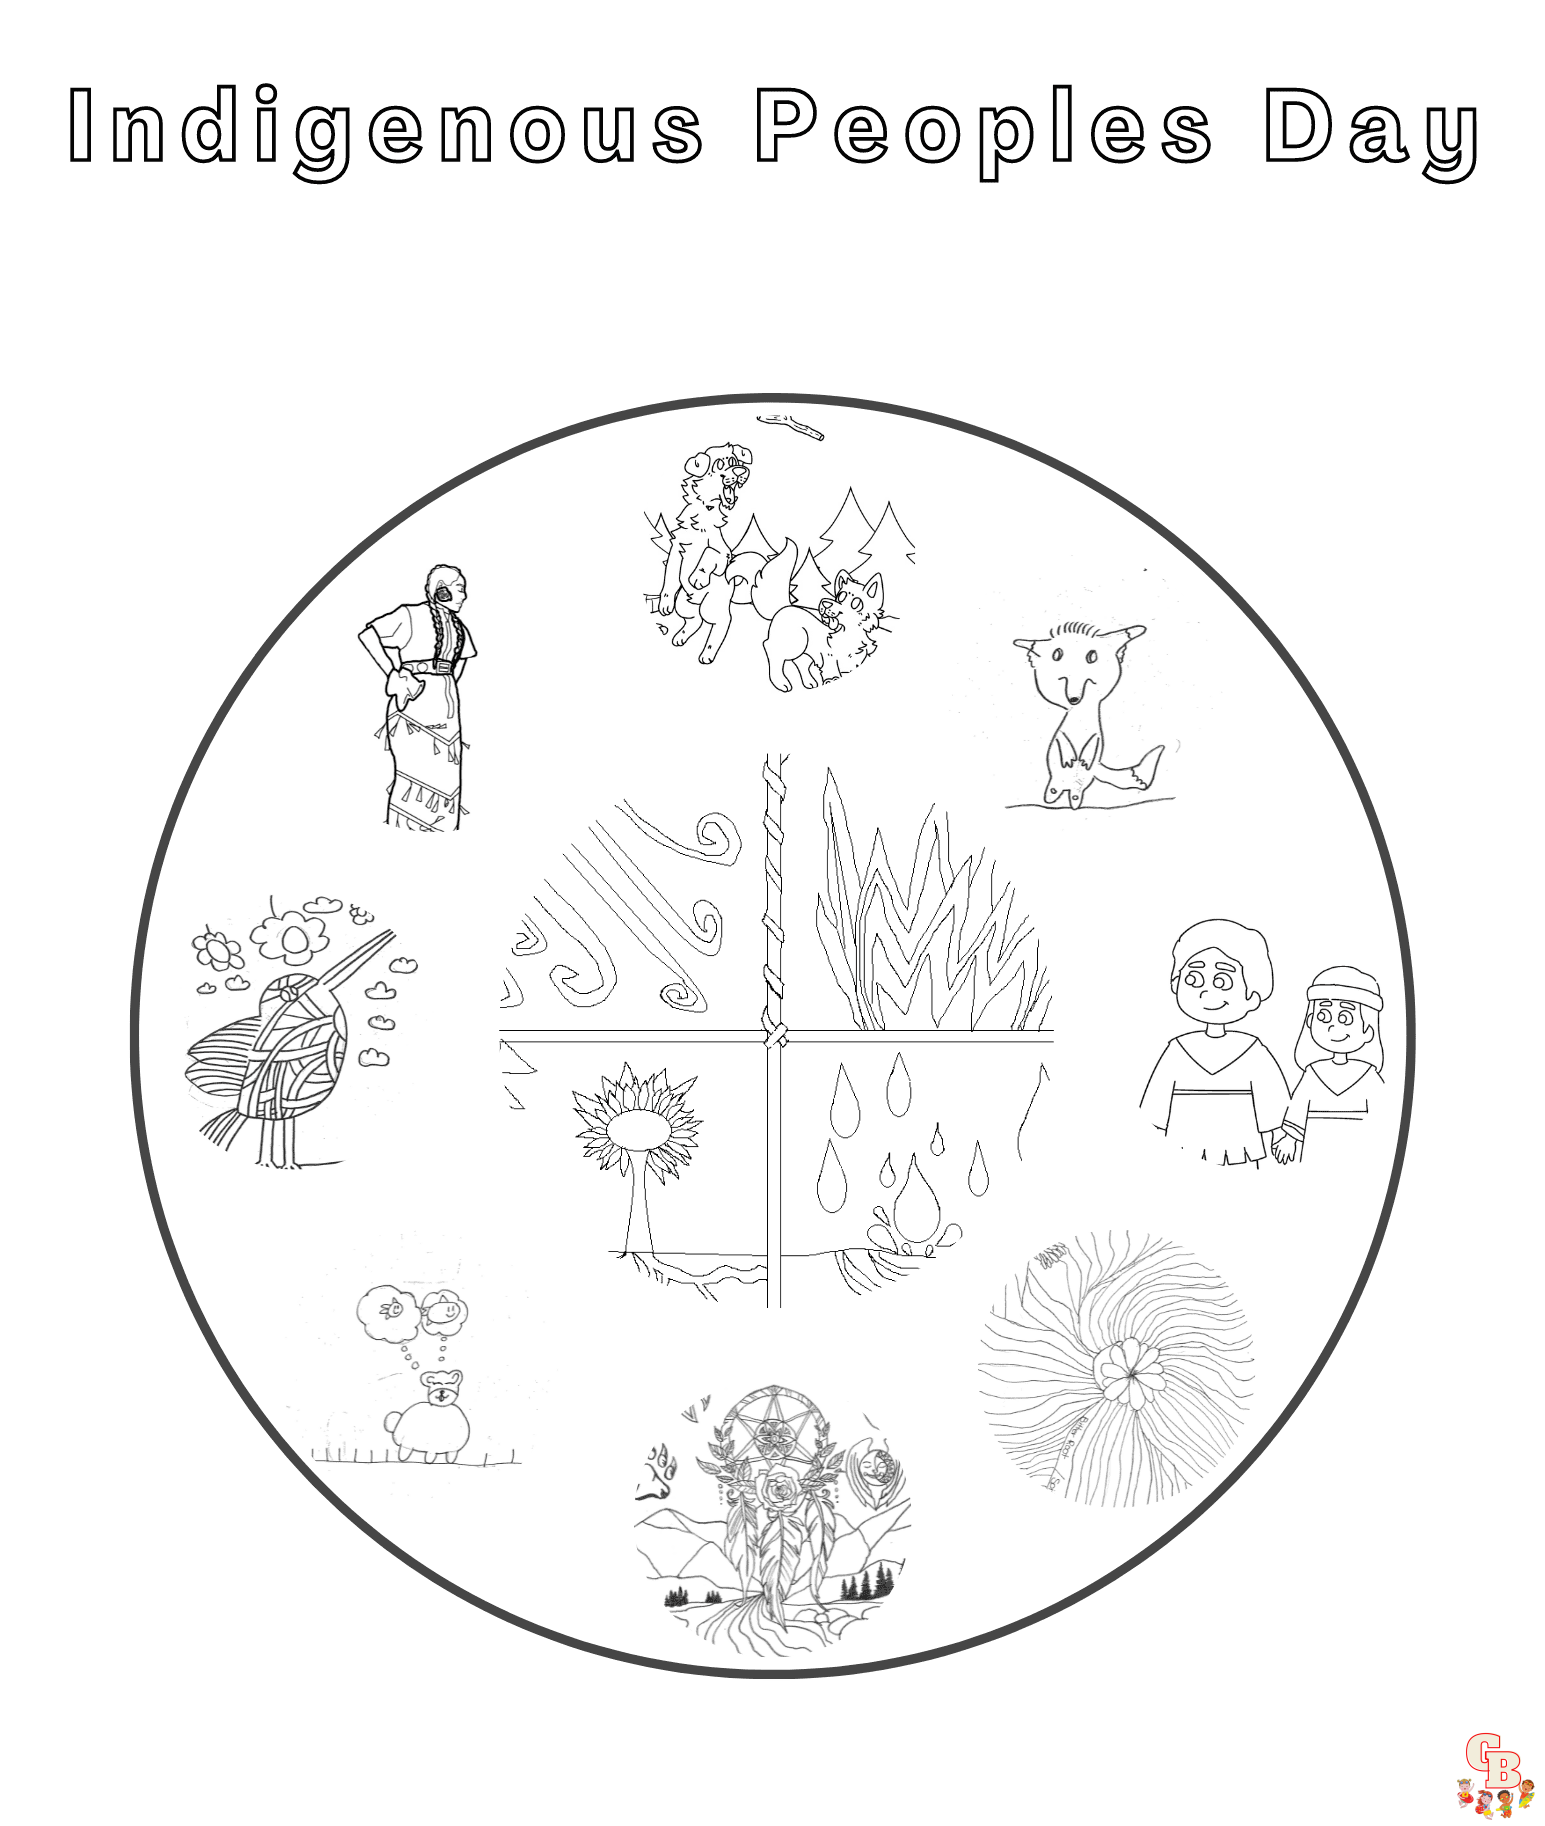 Indigenous Peoples' Day coloring pages printable